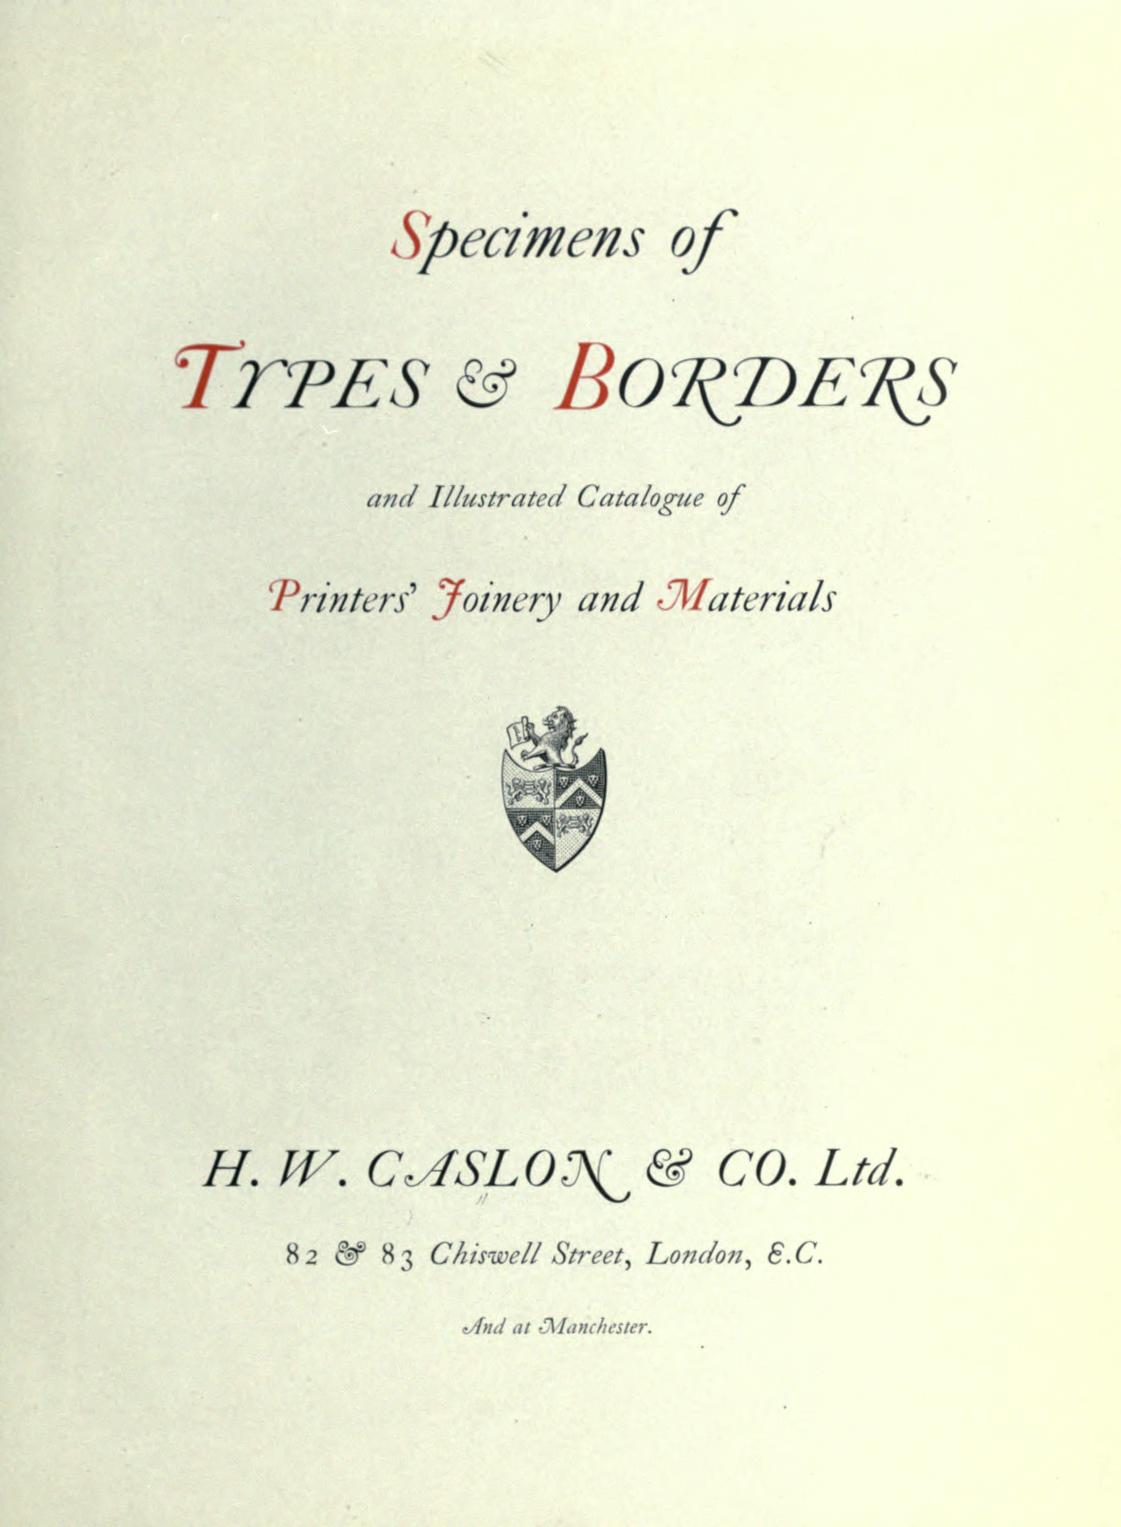 Specimens of types & borders and illustrated catalogue of printers' joinery and materials by H.W. Caslon & Co. 1 edition (1 ebook) - first published in 1915